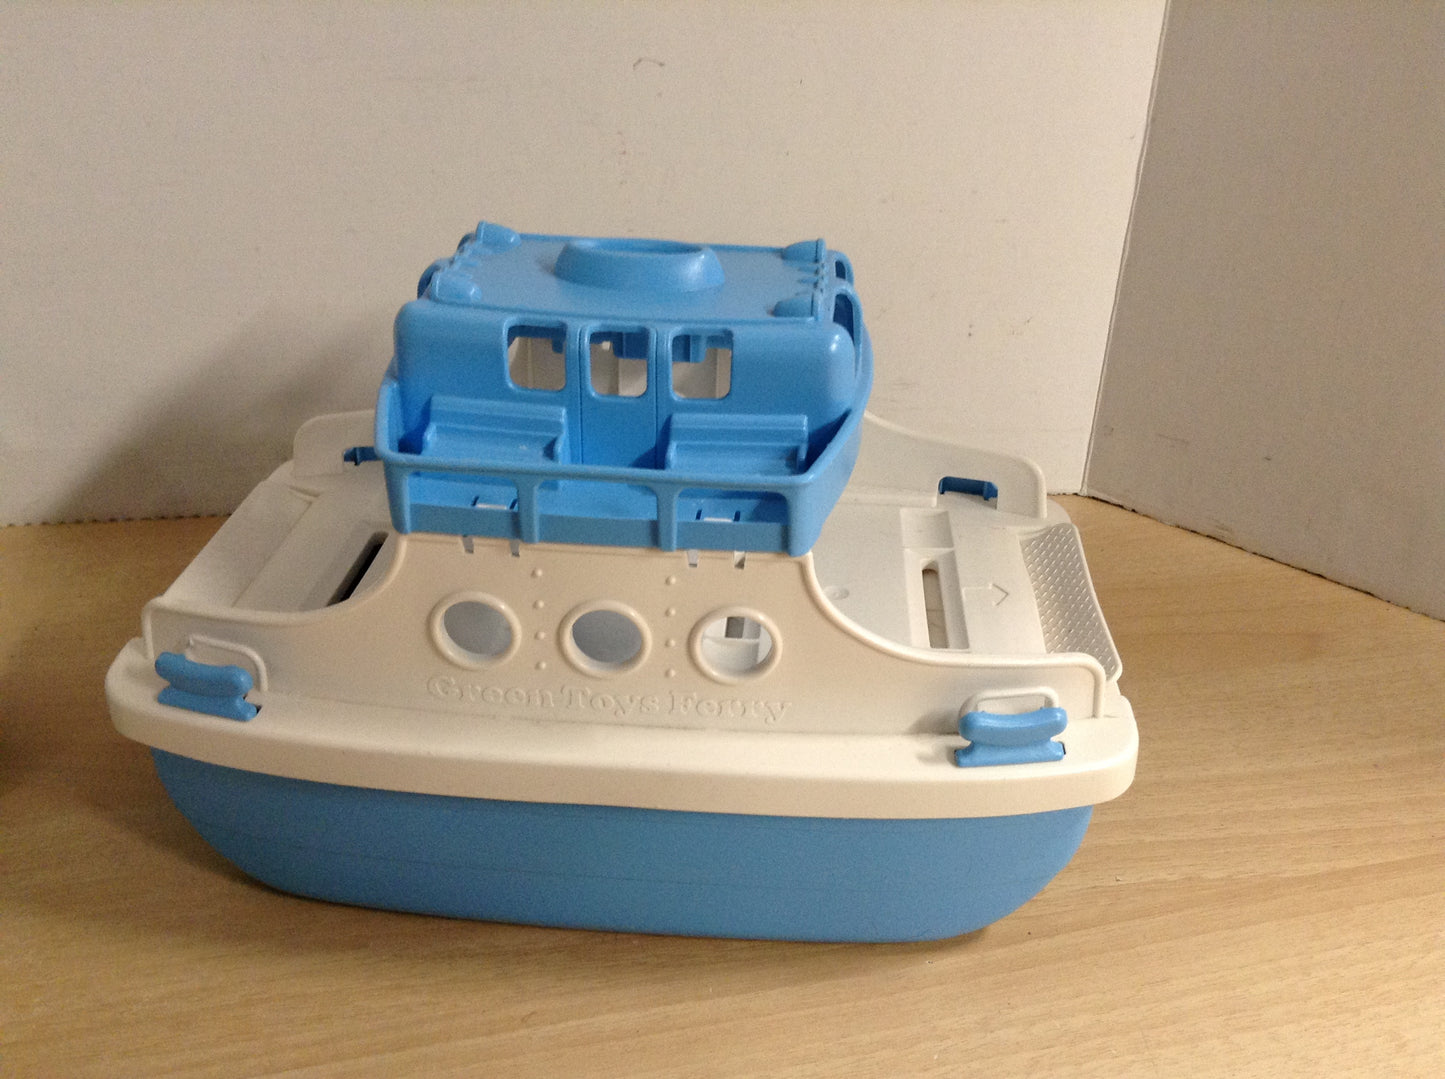 3 Green Toys Bathtub Tug Boat and Ferry With Under Water Shark